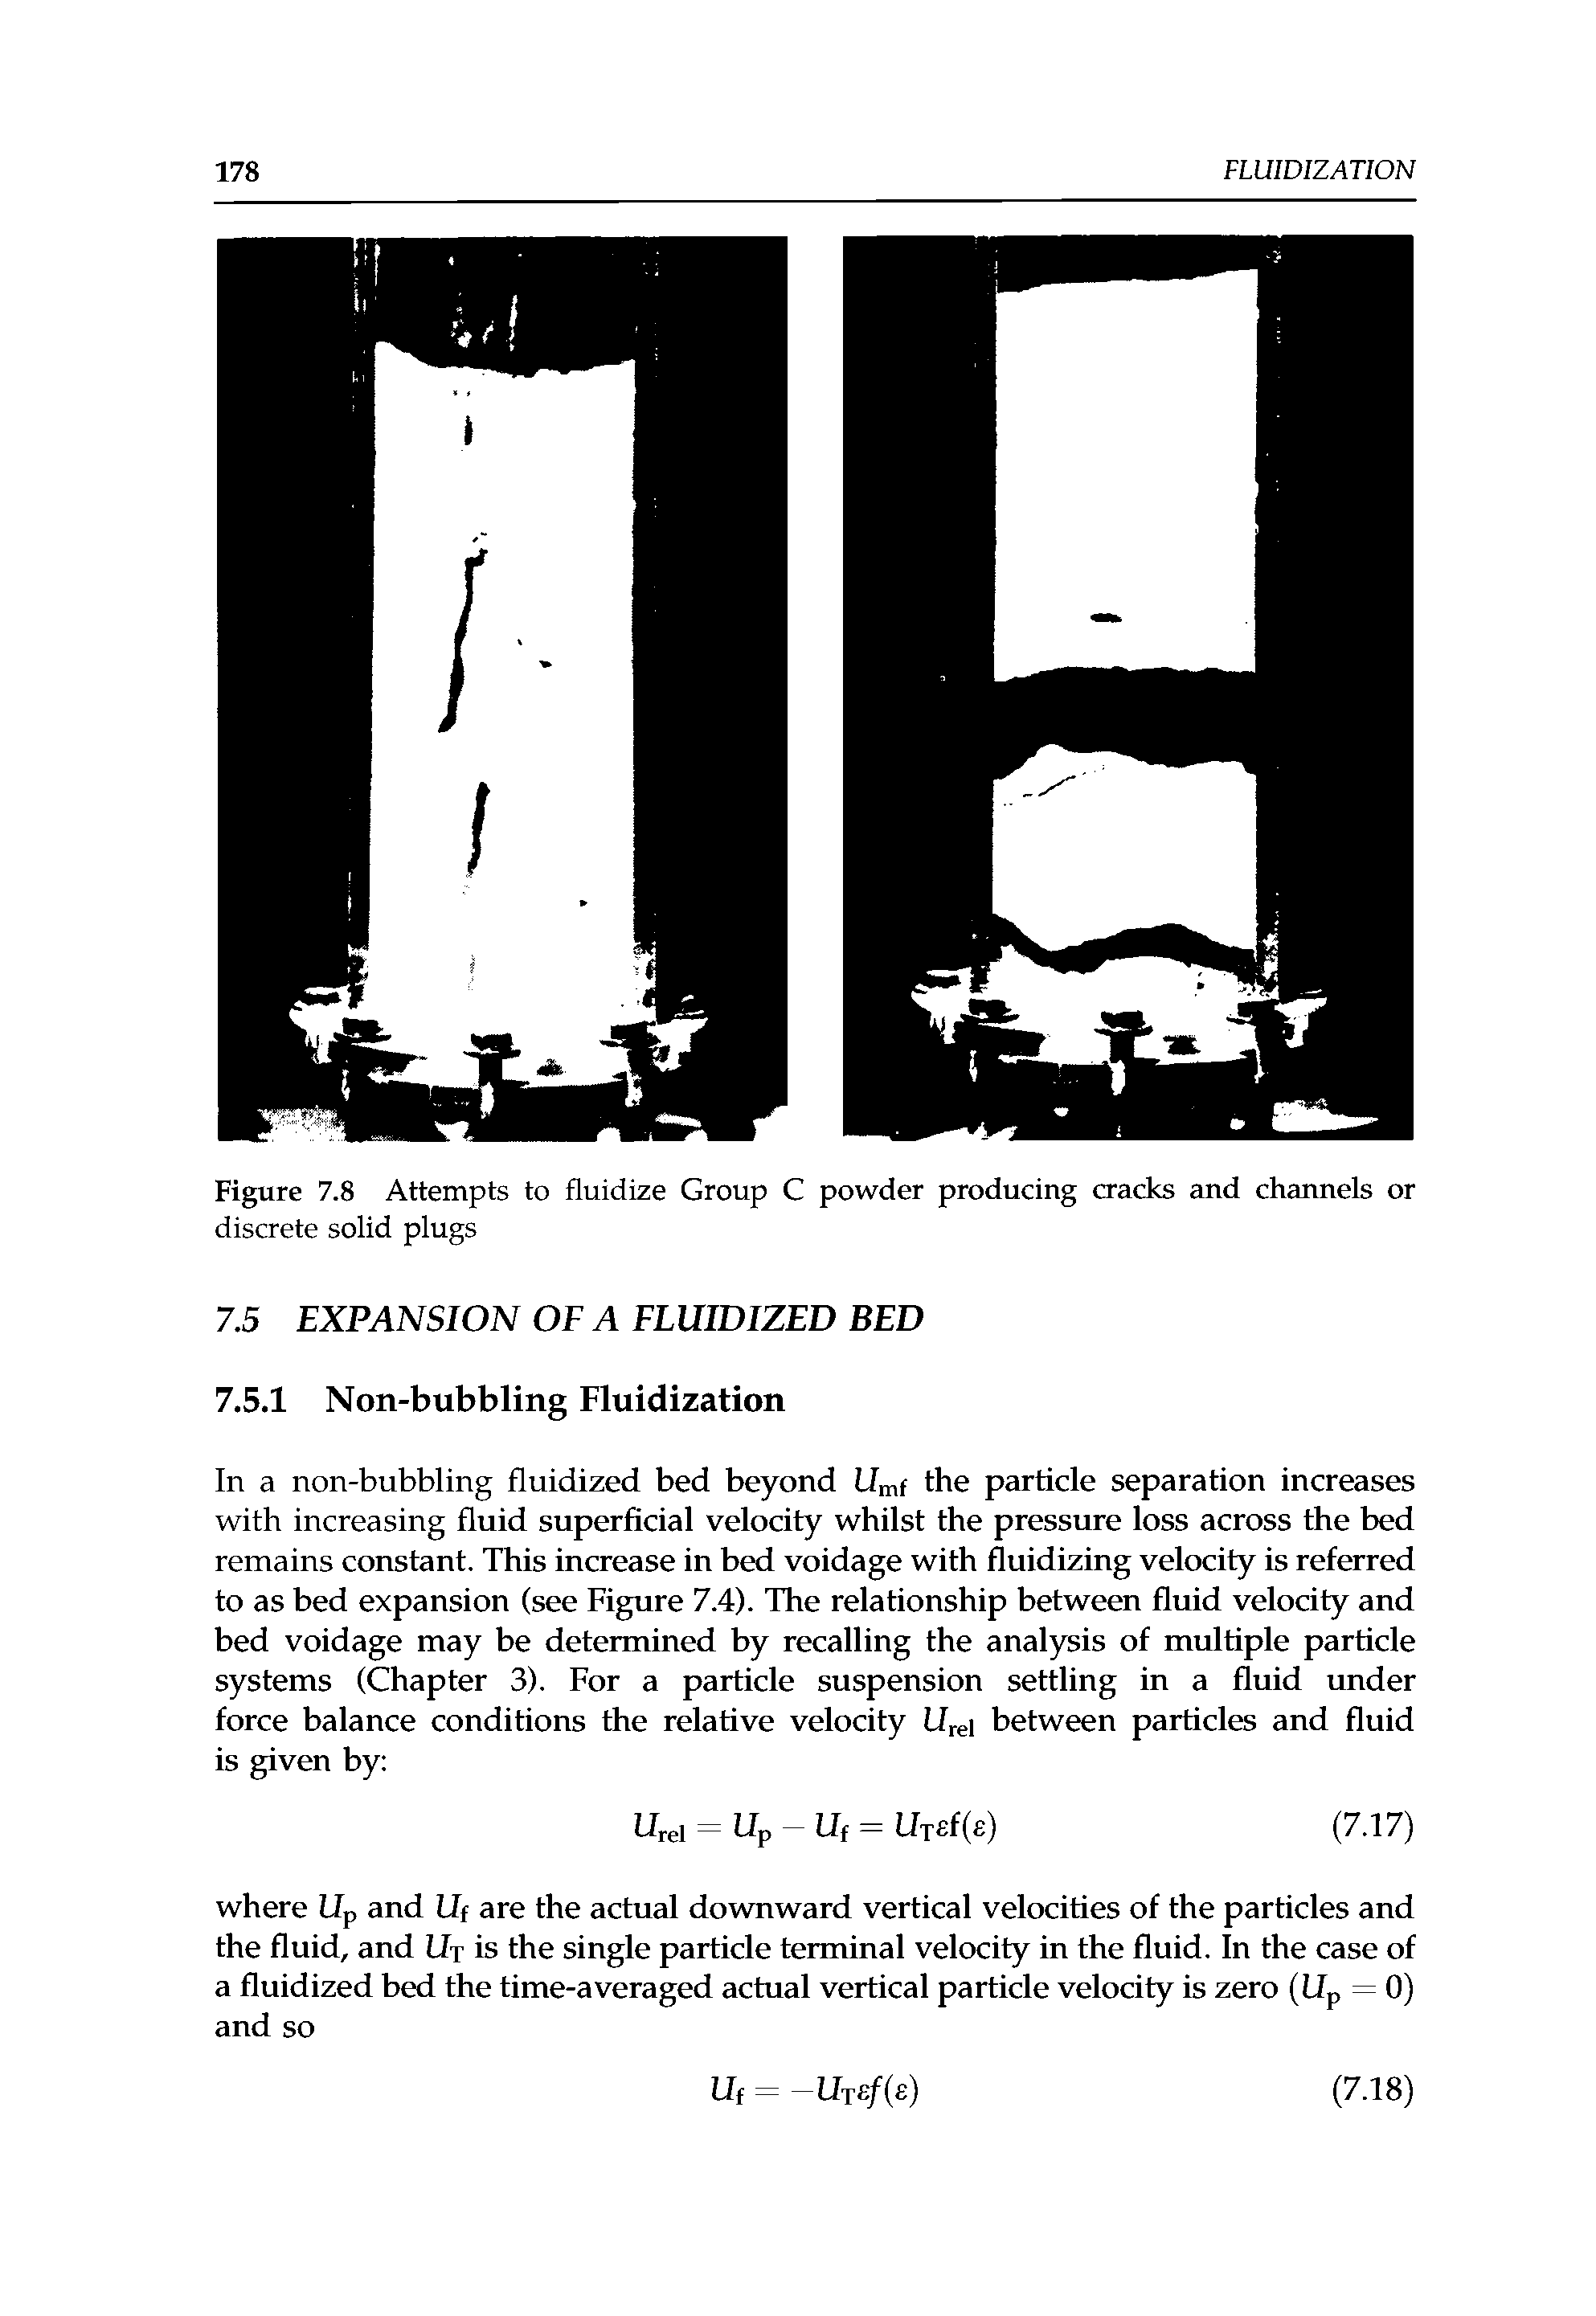 Figure 7.8 Attempts to fluidize Group C powder producing cracks and channels or discrete solid plugs...